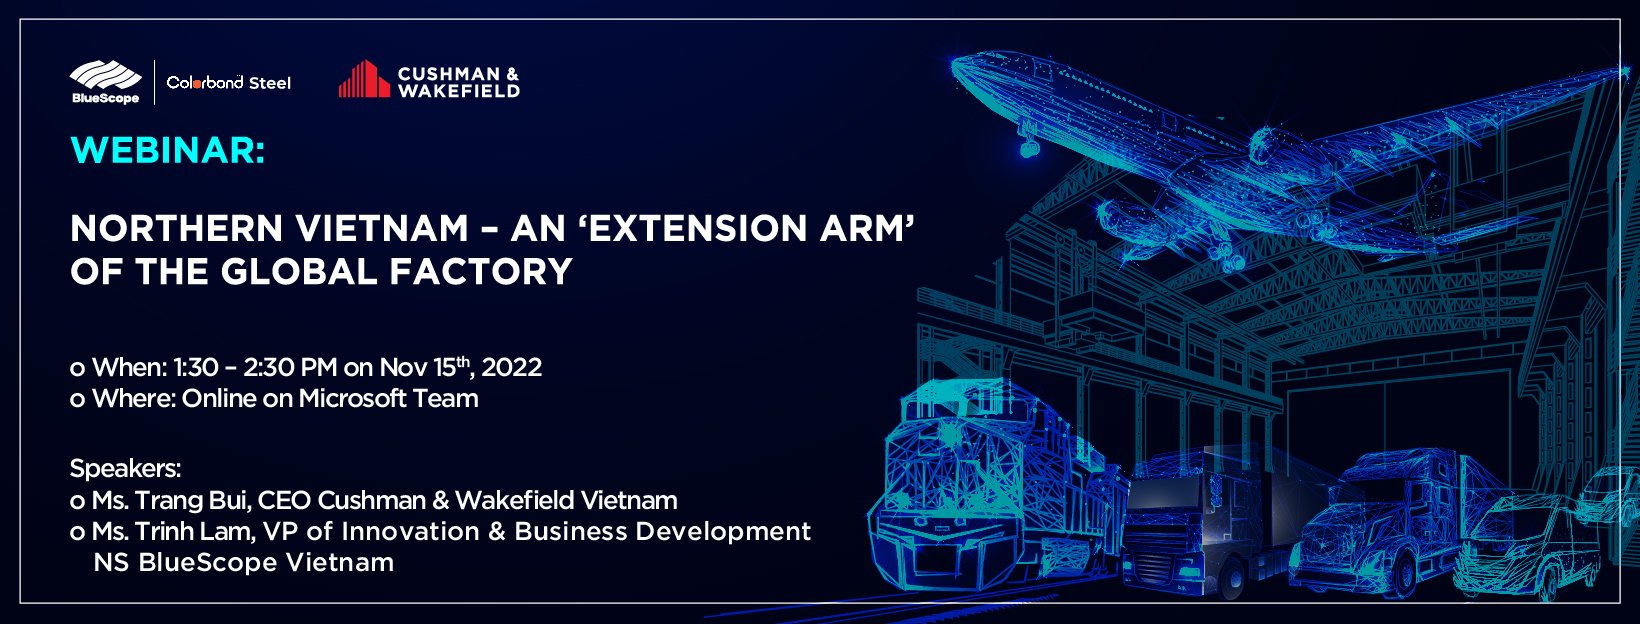 NORTHERN VIETNAM – AN ‘EXTENSION ARM’ OF THE GLOBAL FACTORY